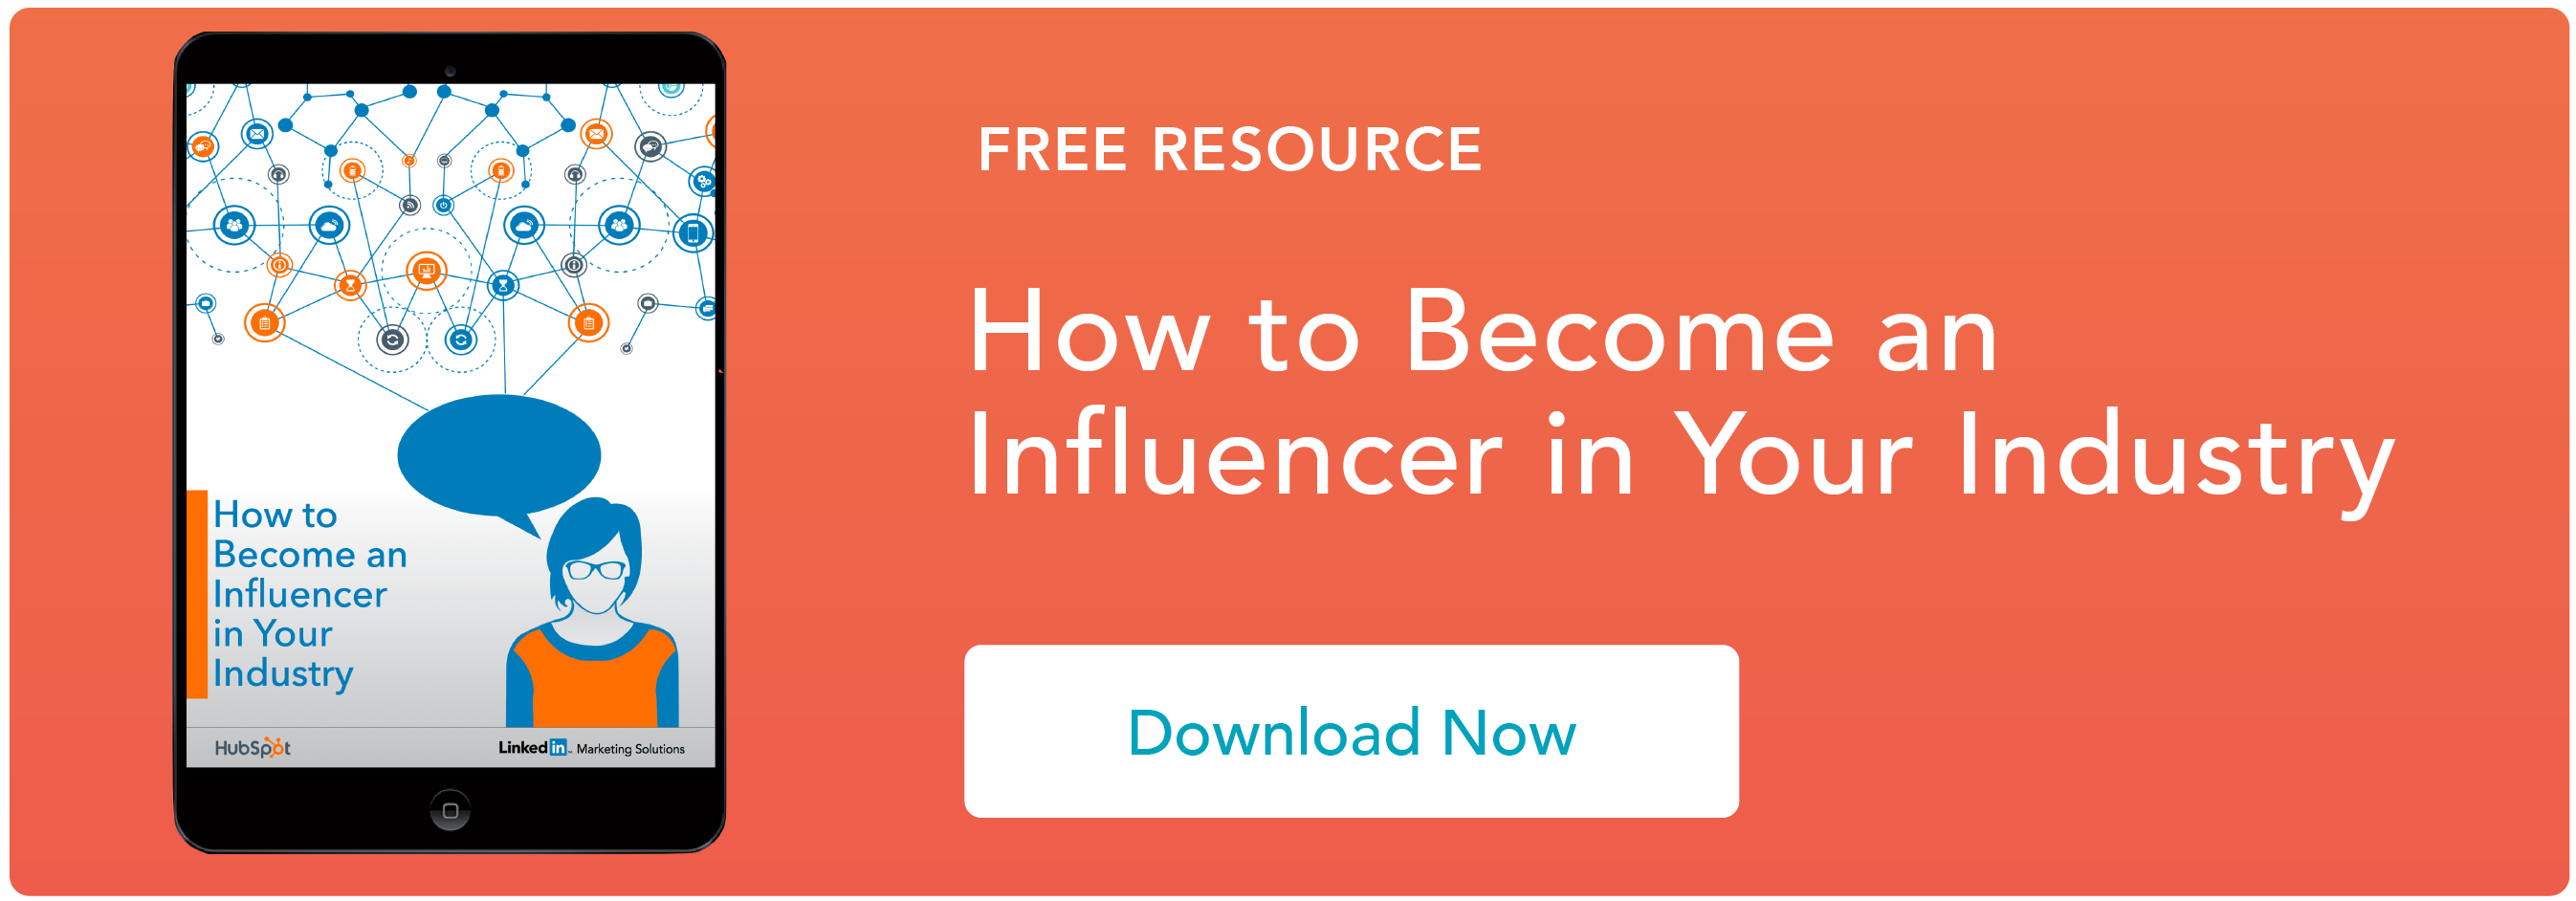 How to Become an Influencer in Your Industry Ebook